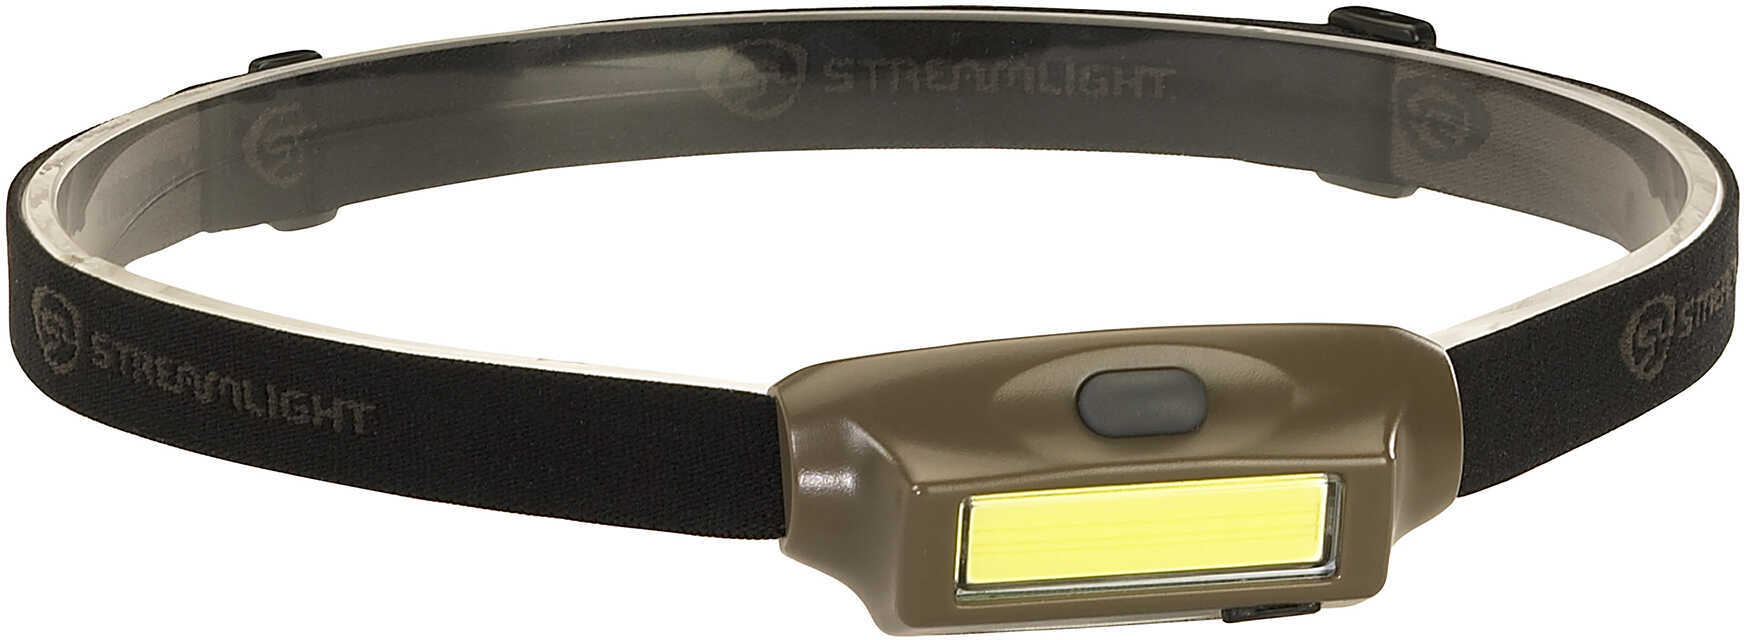 Streamlight Bandit Headlamp White/Red Led 3 MODES Coyote